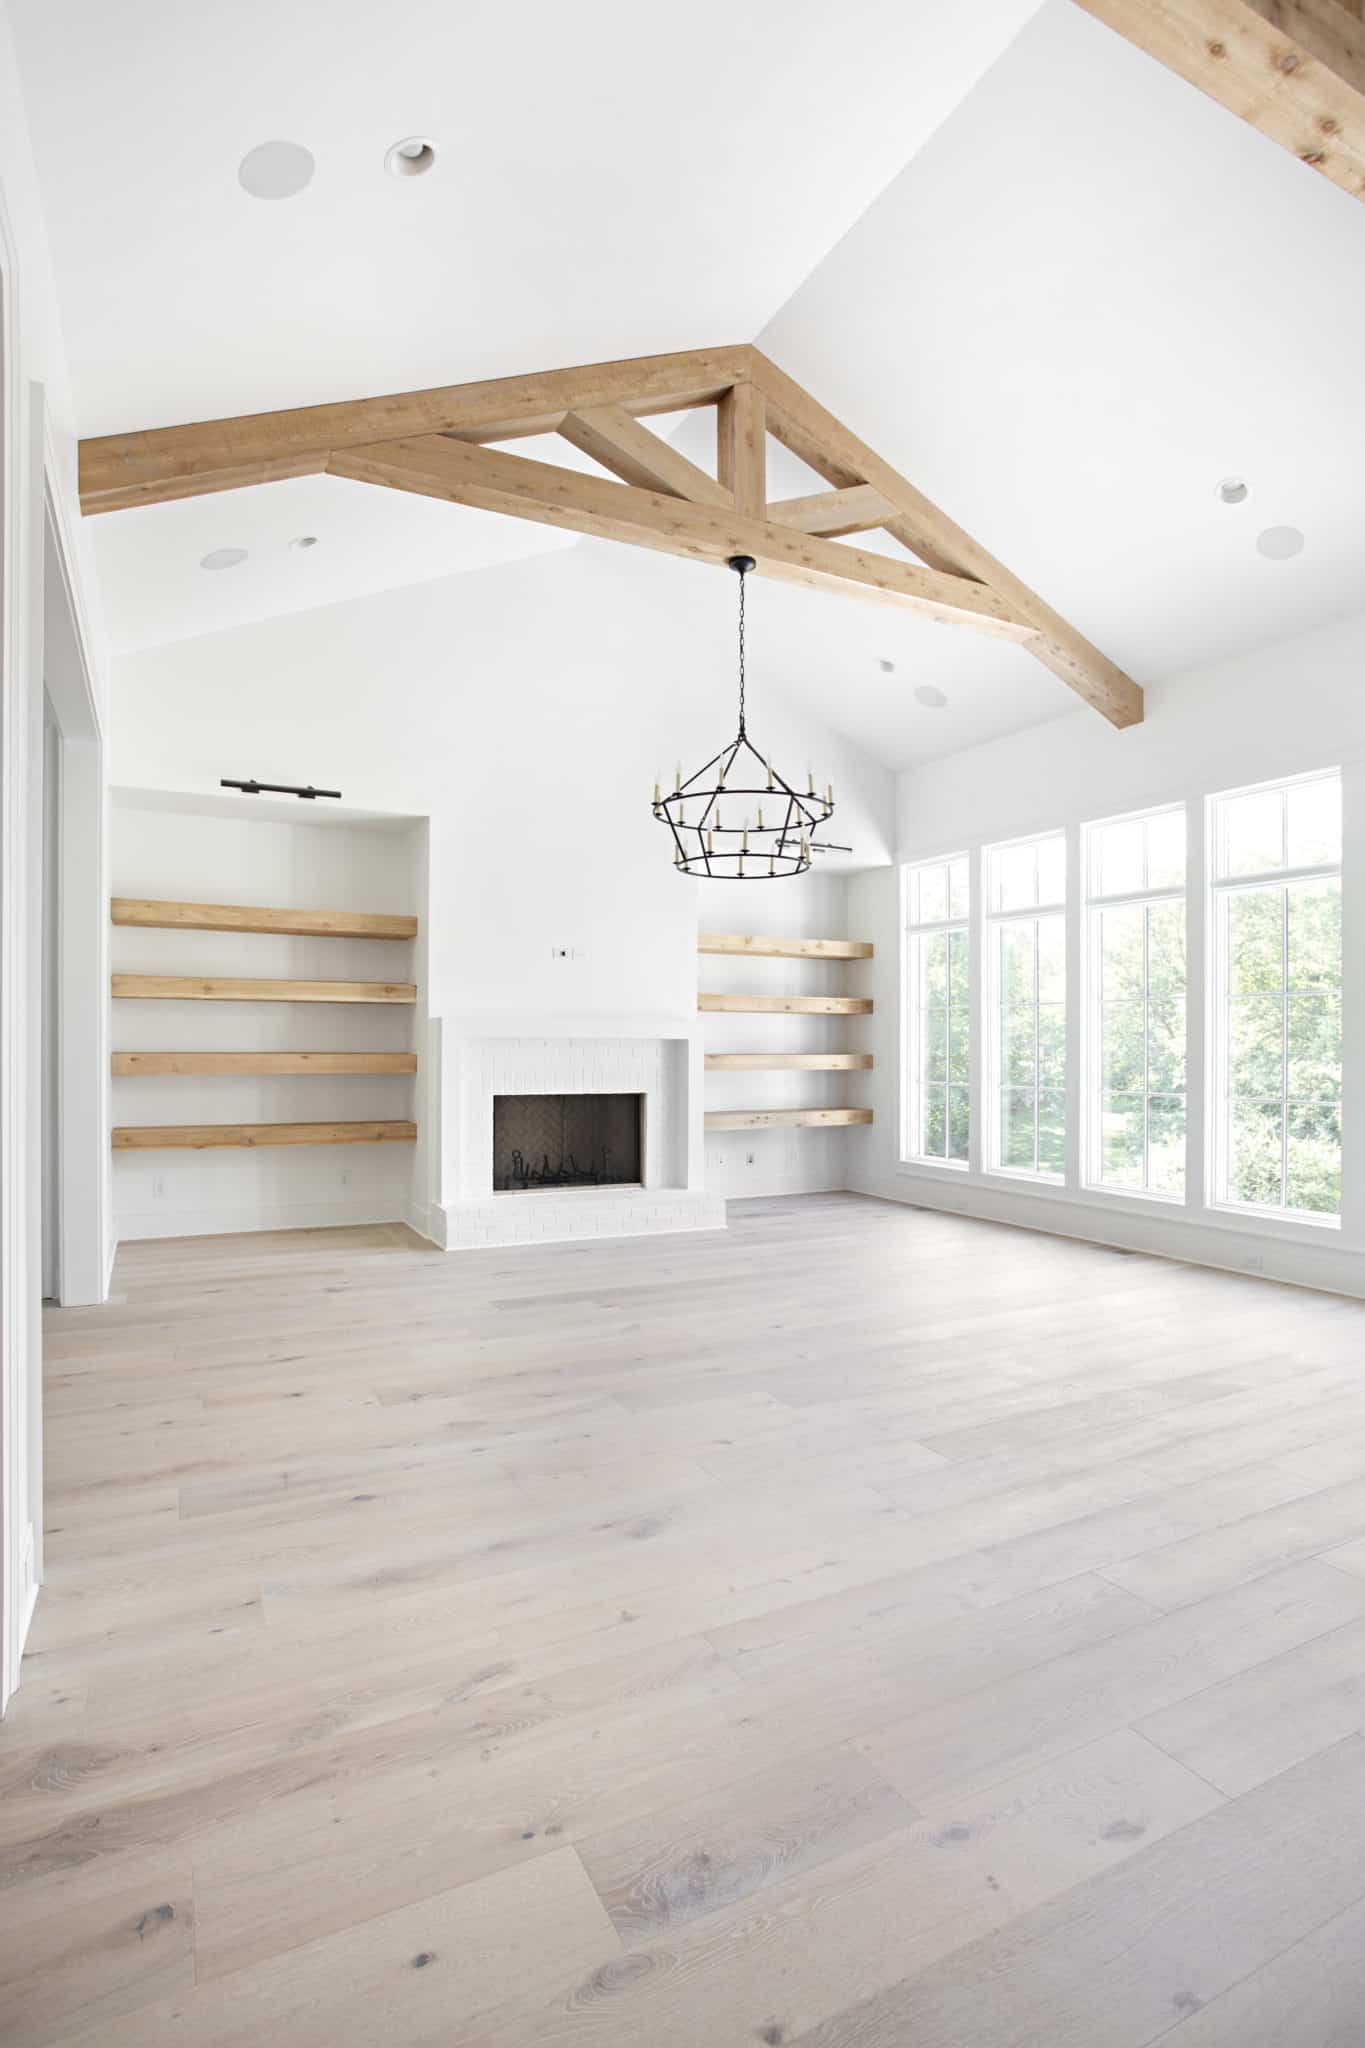 Difference between red and white oak
hardwood flooring